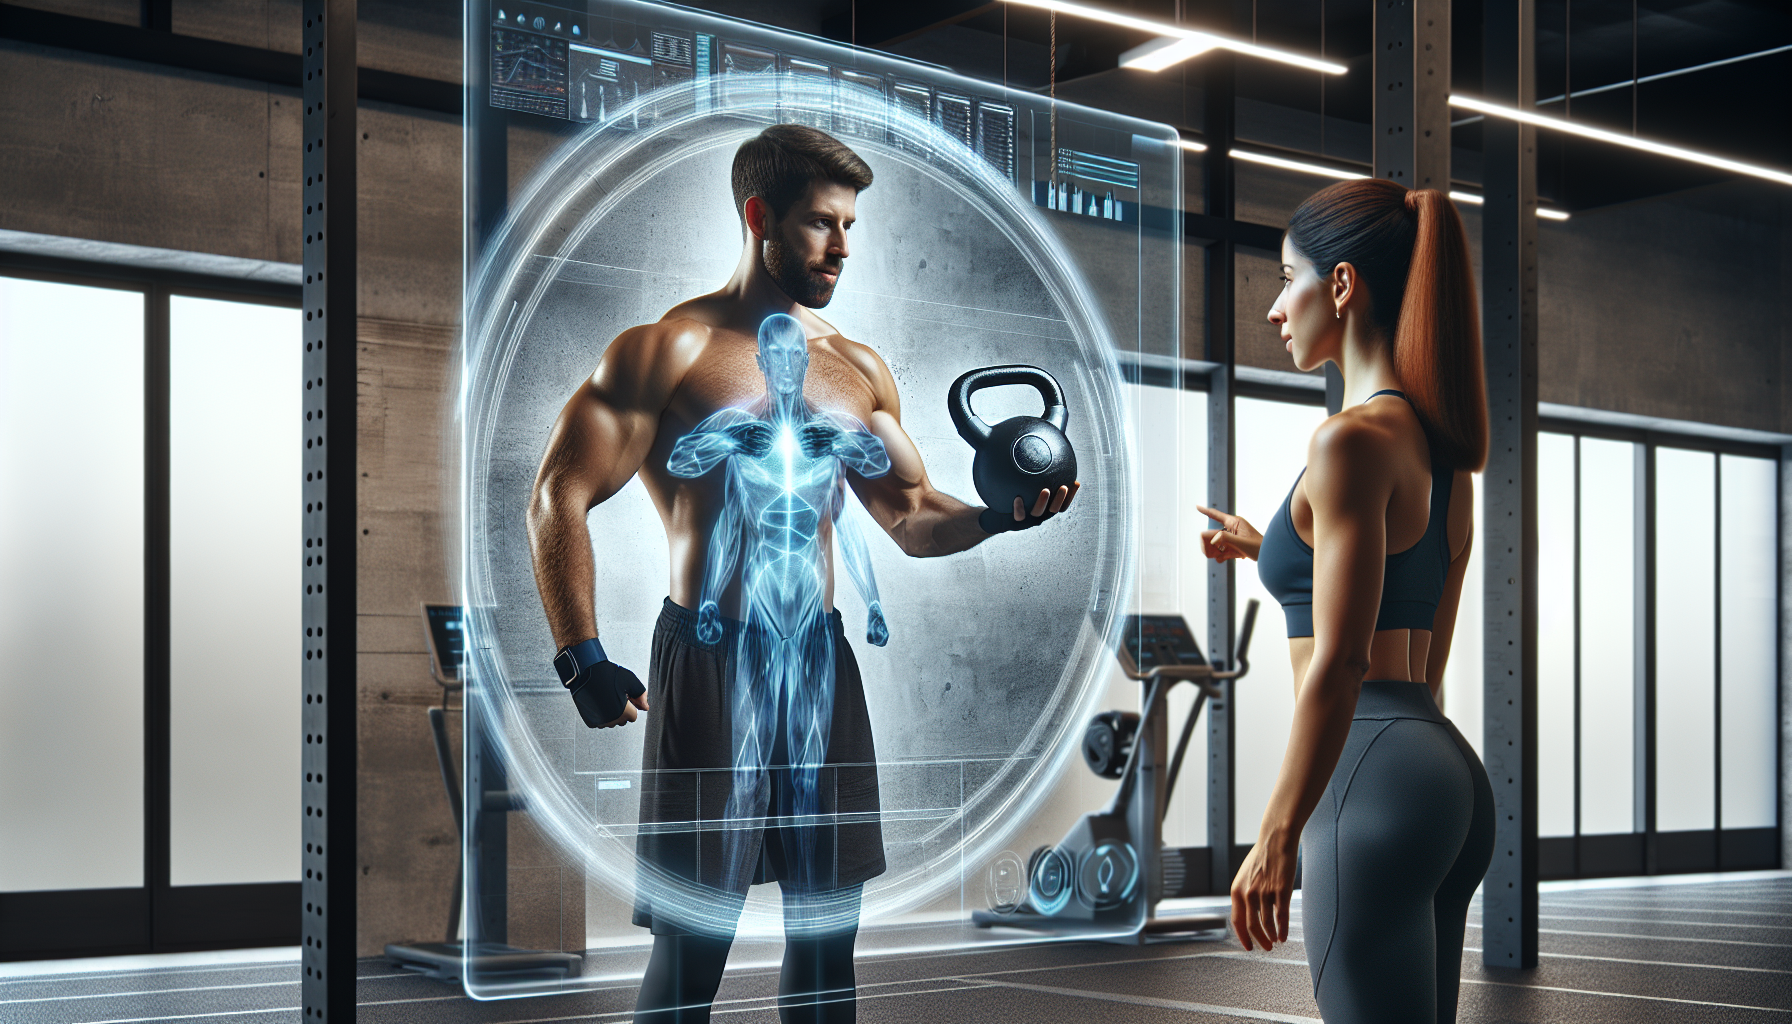 Personal trainer using digital fitness platform with a client